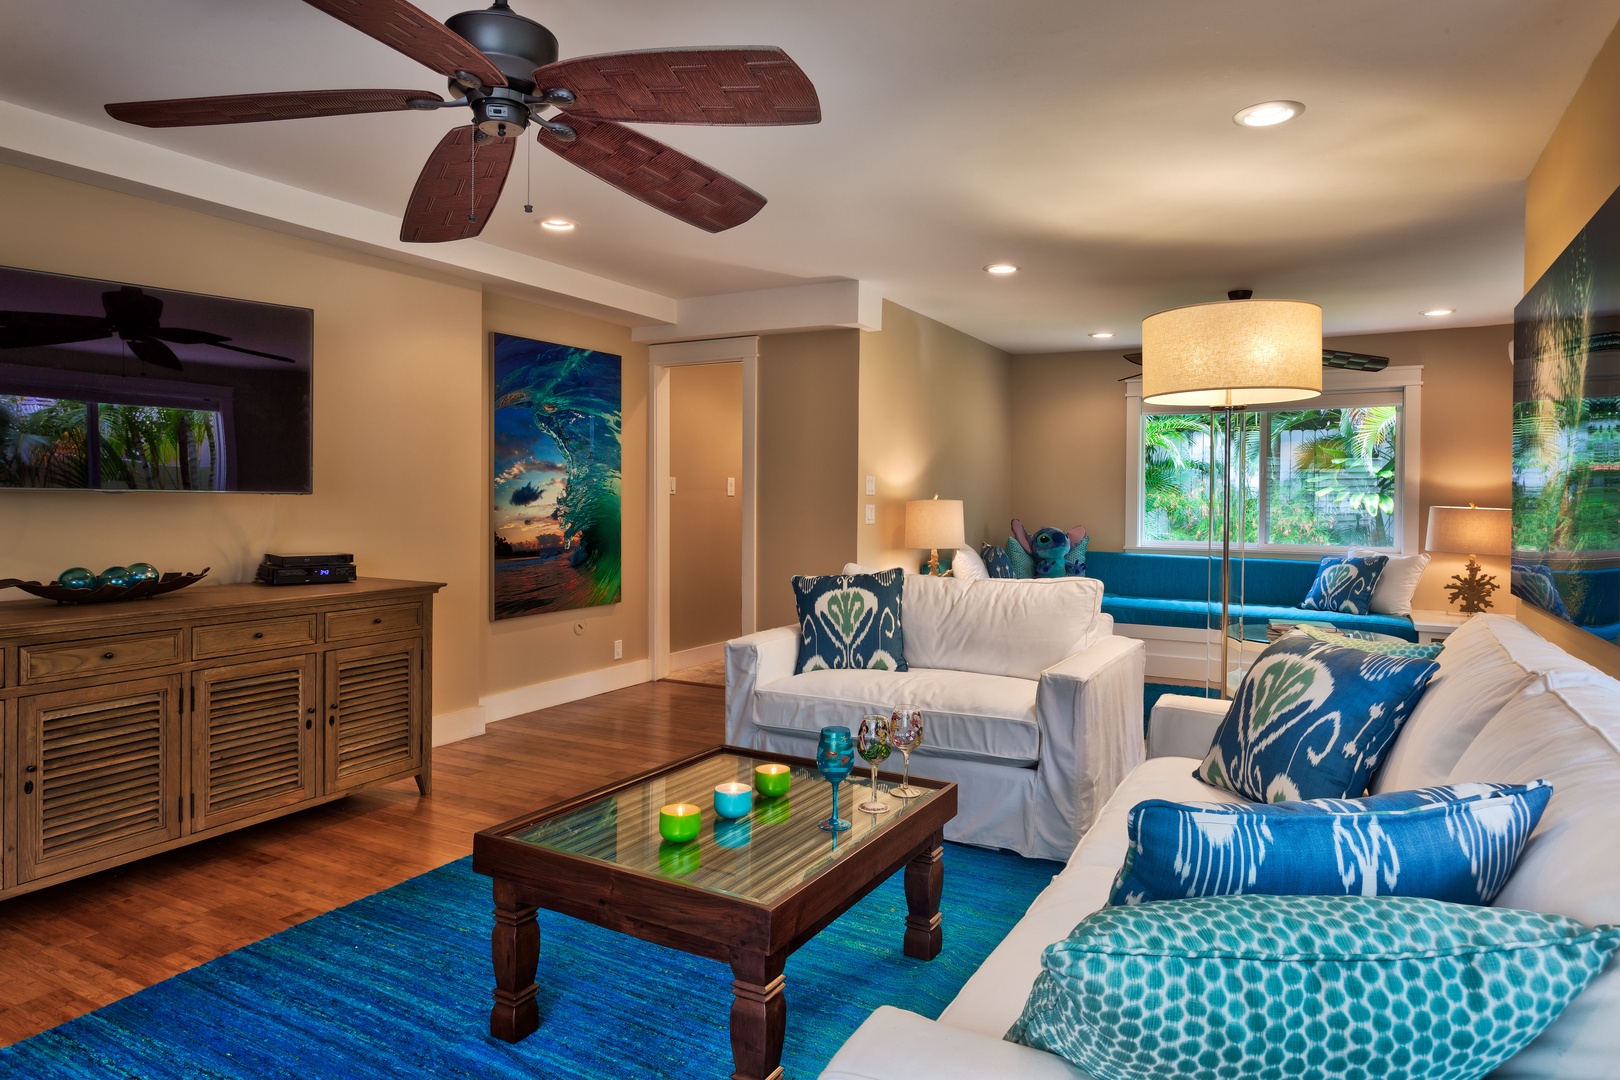 Kailua Vacation Rentals, Maluhia - No lack of relaxing areas in this Villa